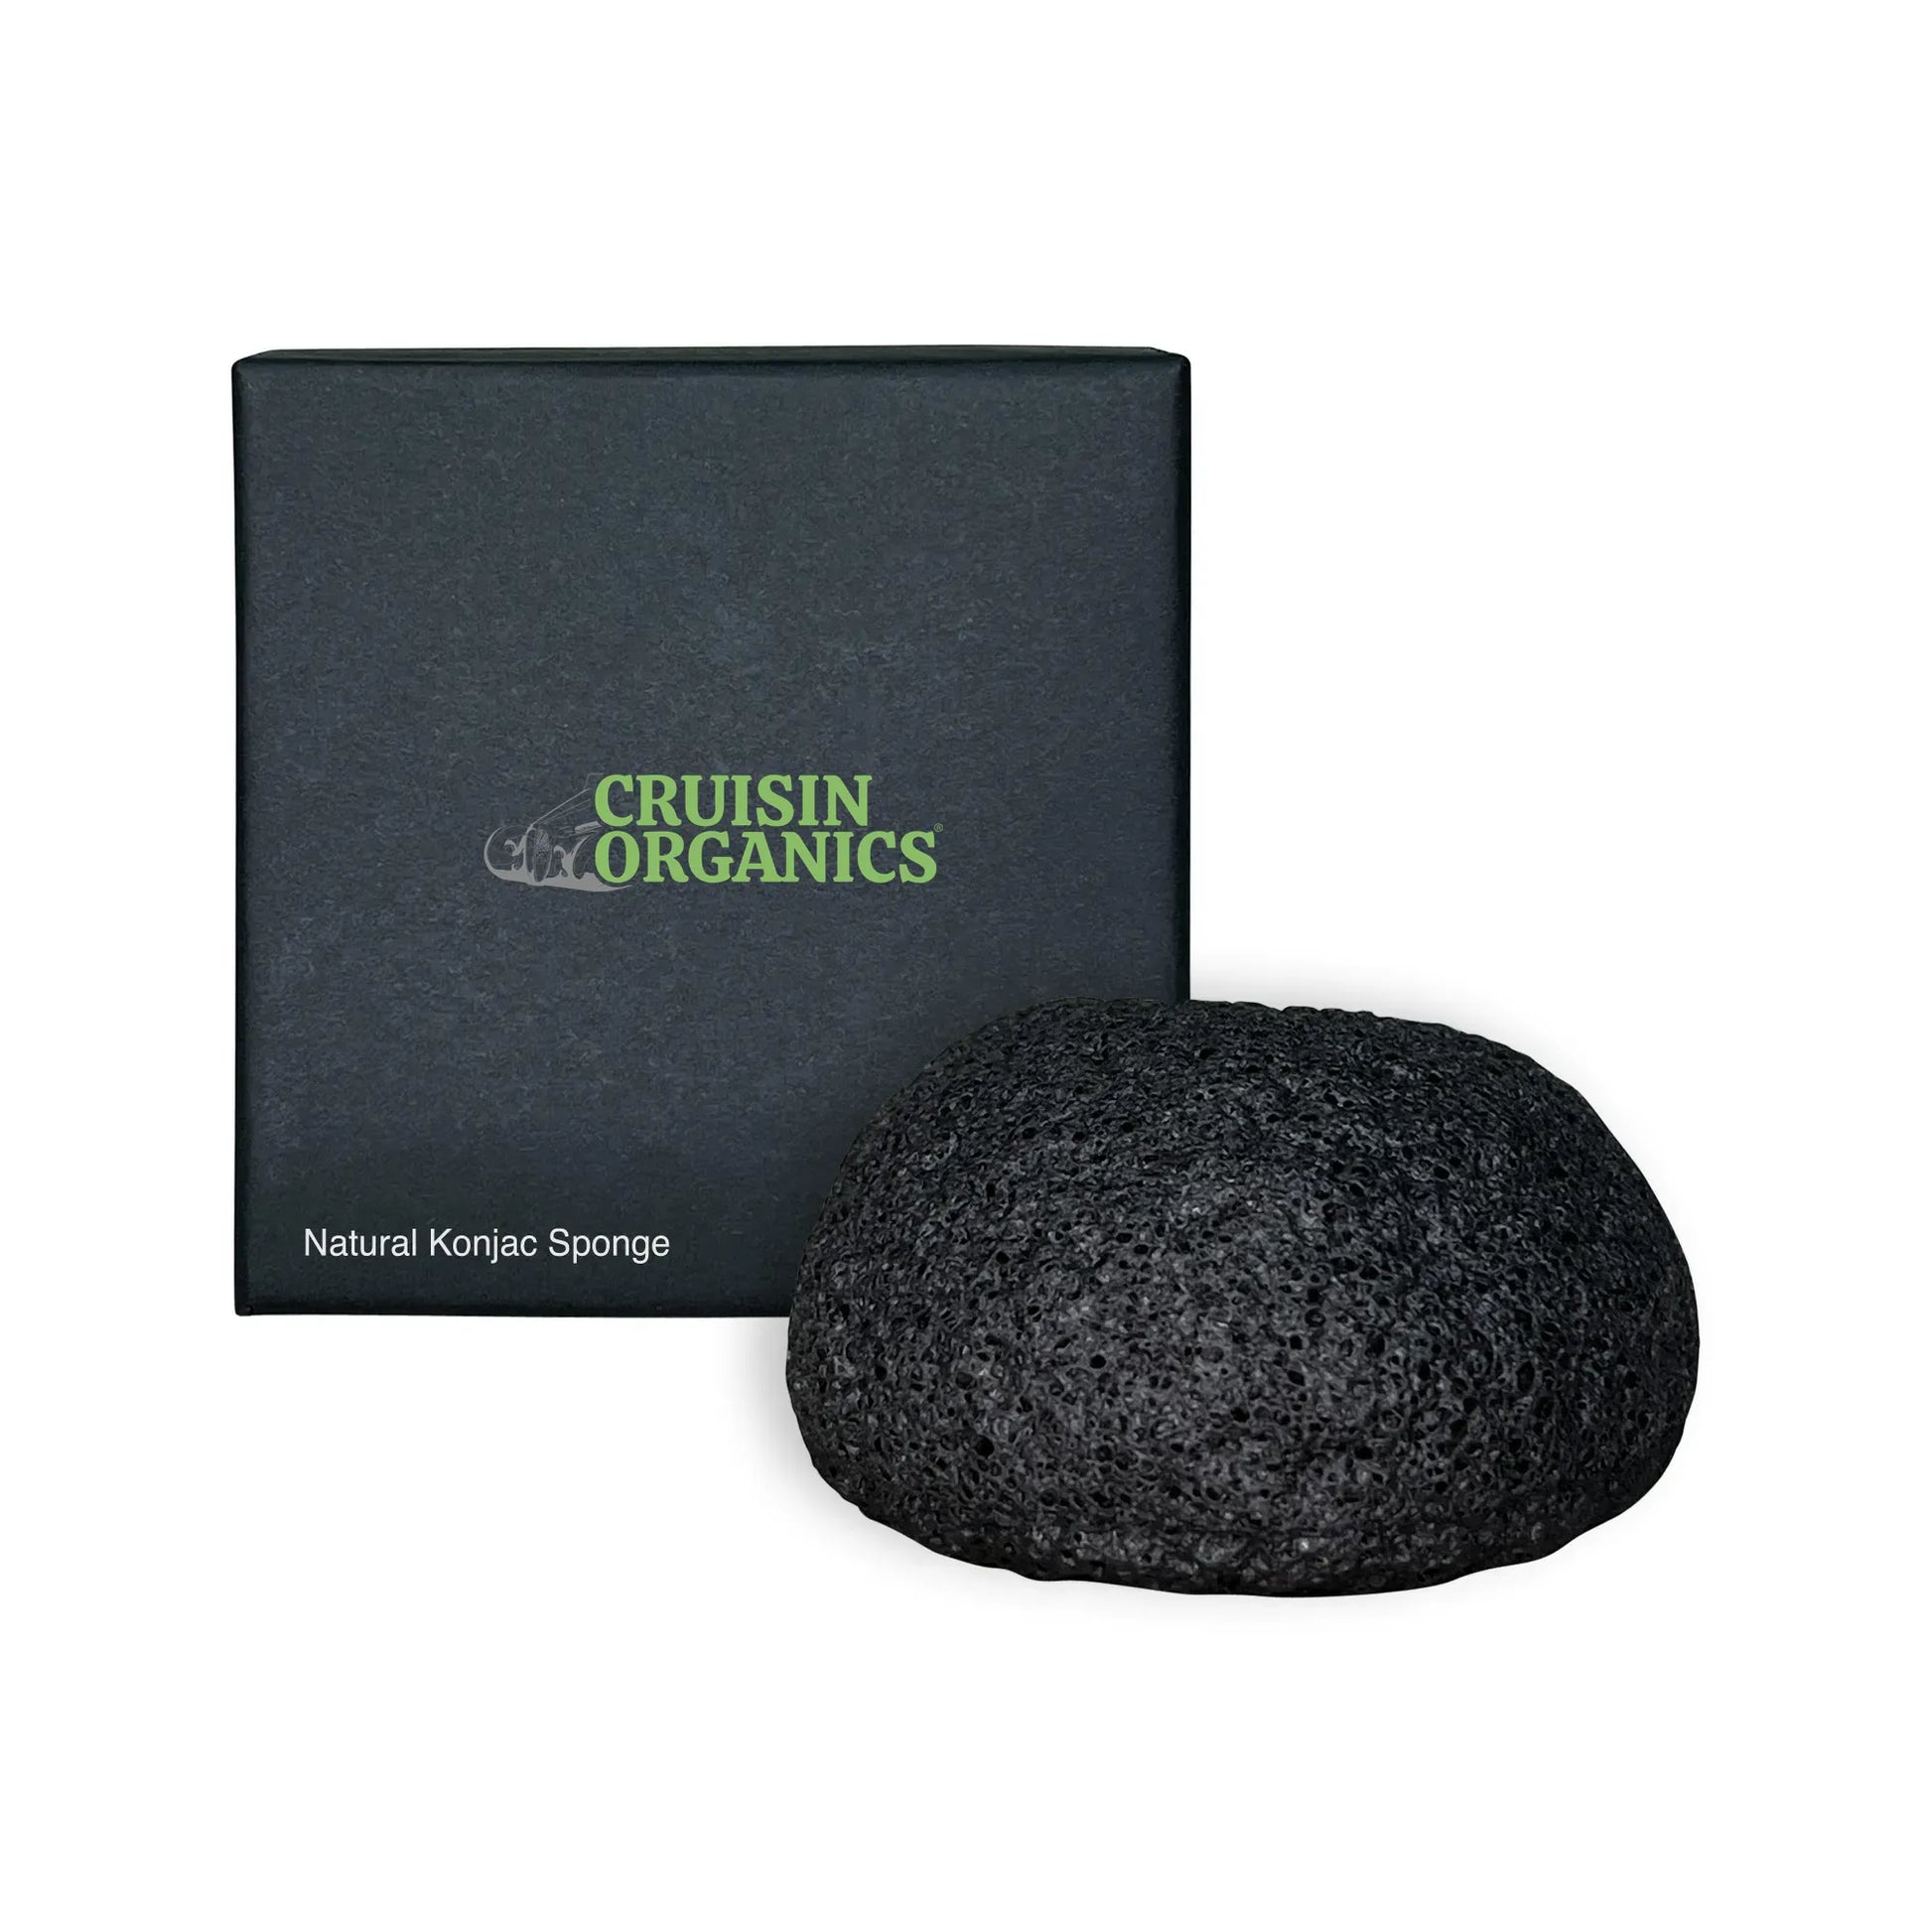 Take on a new adventure with Cruisin Organics Konjac Sponge. This all-natural, biodegradable sponge made from the fibers of the konjac root provides a superior exfoliating face scrub. Fit in the palm of your hand and pair with your preferred charcoal face cleanser to rid your face of all pollutants and reveal softer, cleaner skin!